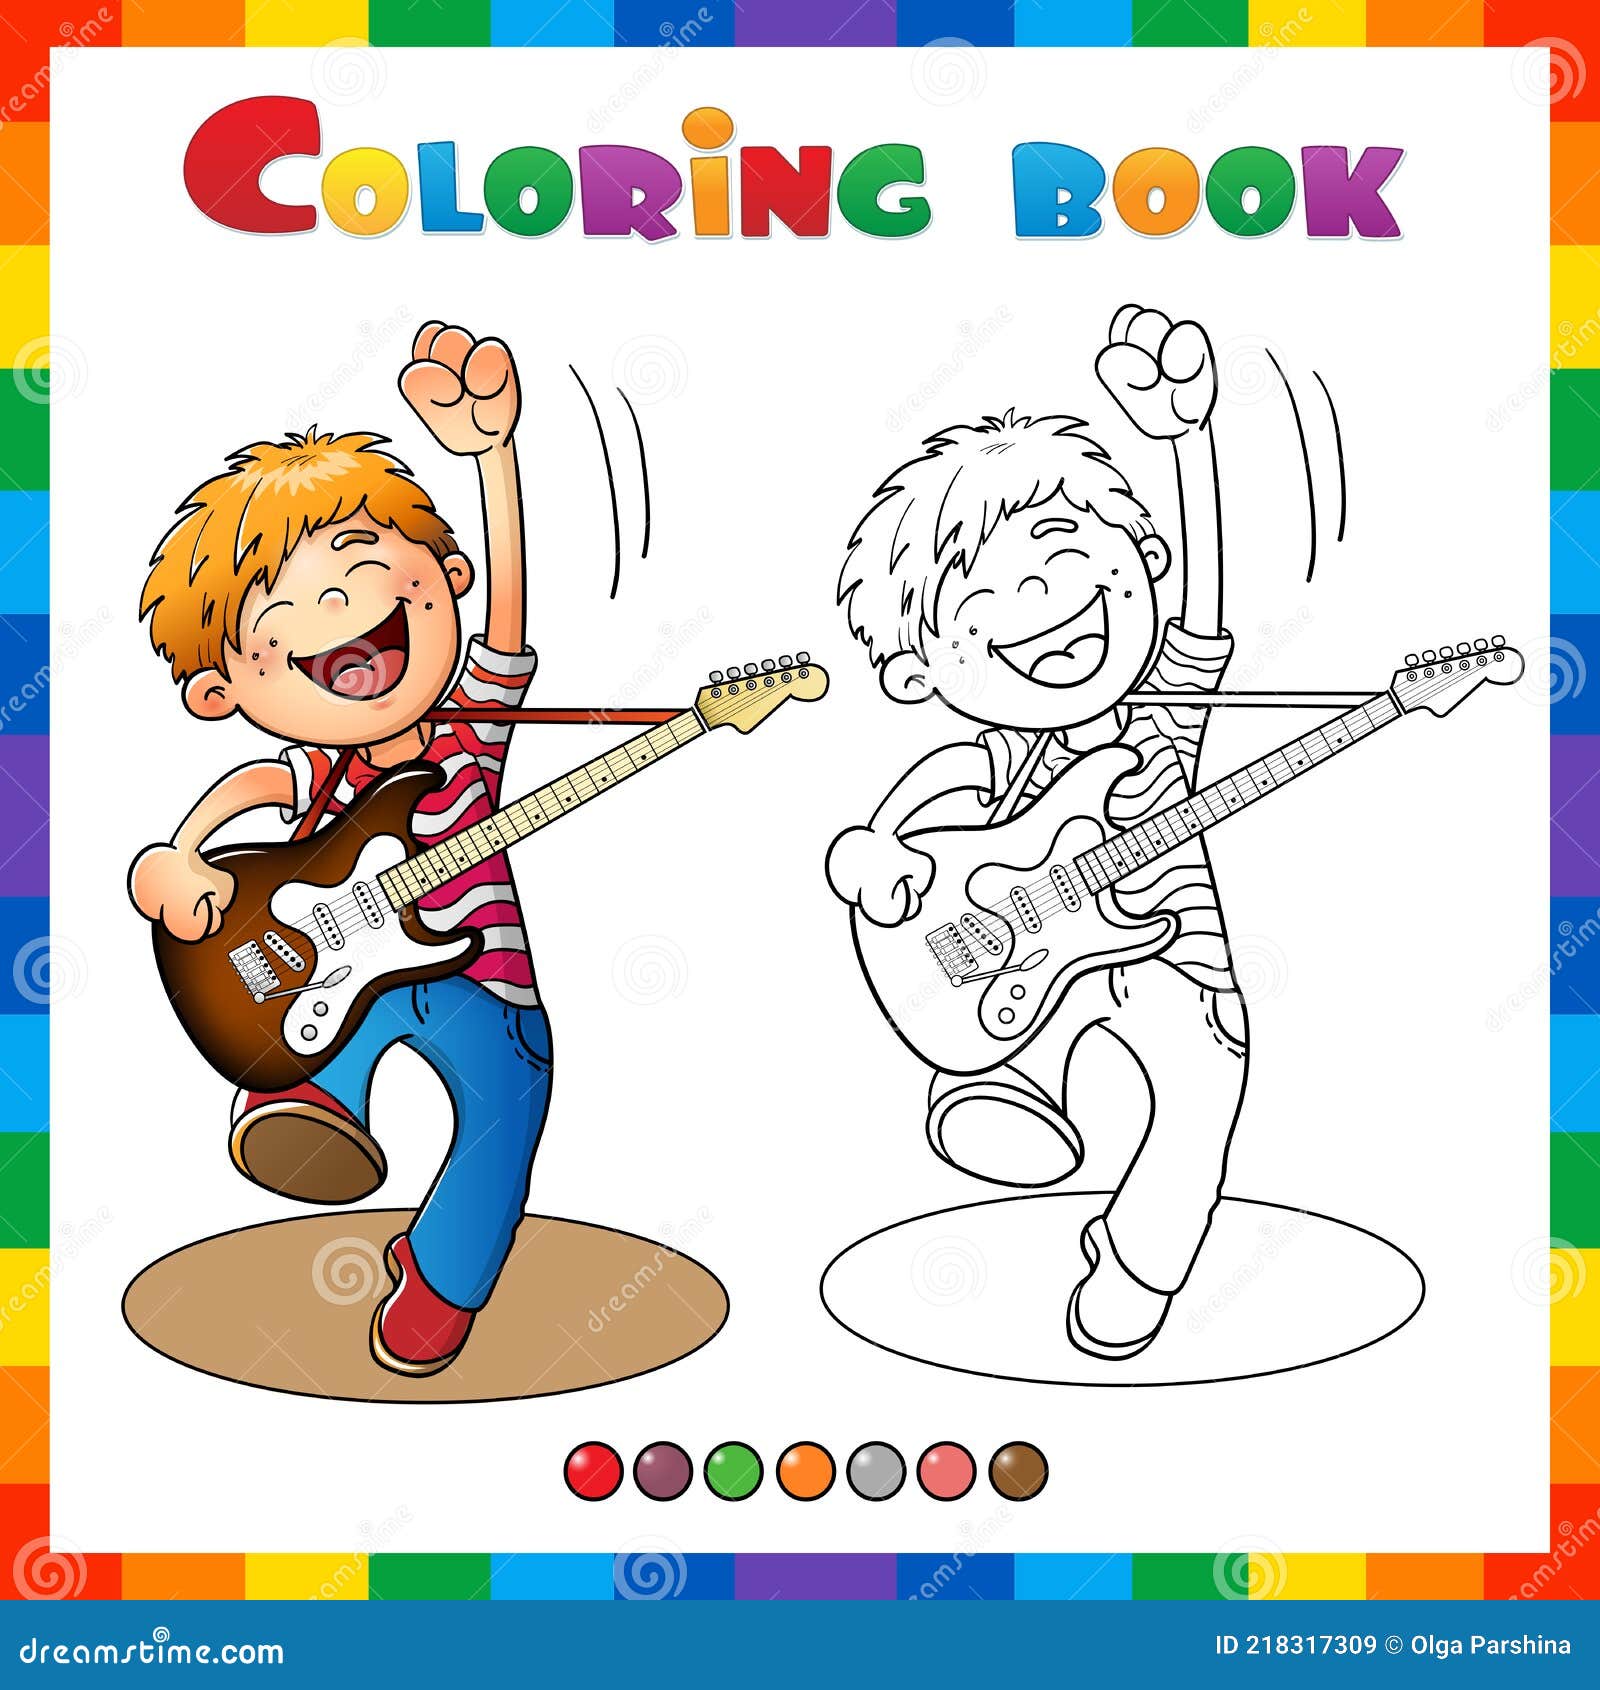 Coloring Page Outline of Cartoon Boy with a Guitar. Coloring Book for Kids  Stock Vector - Illustration of childish, concert: 218317309